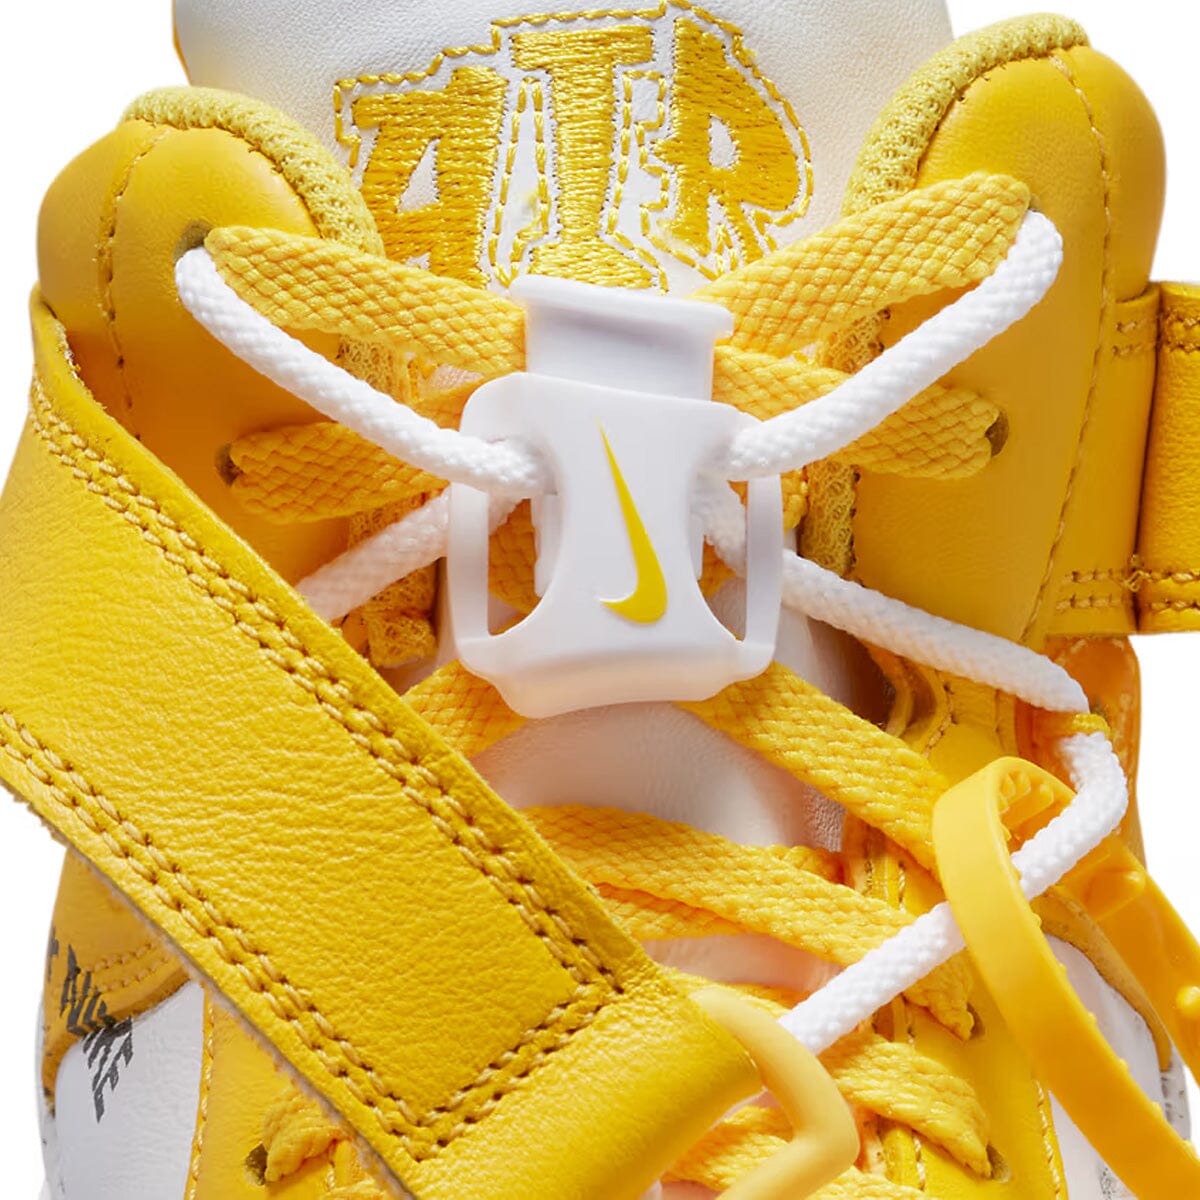 Nike Air Force 1 Mid SP Off-White Varsity Maize Air Force 1 Blizz Sneakers 